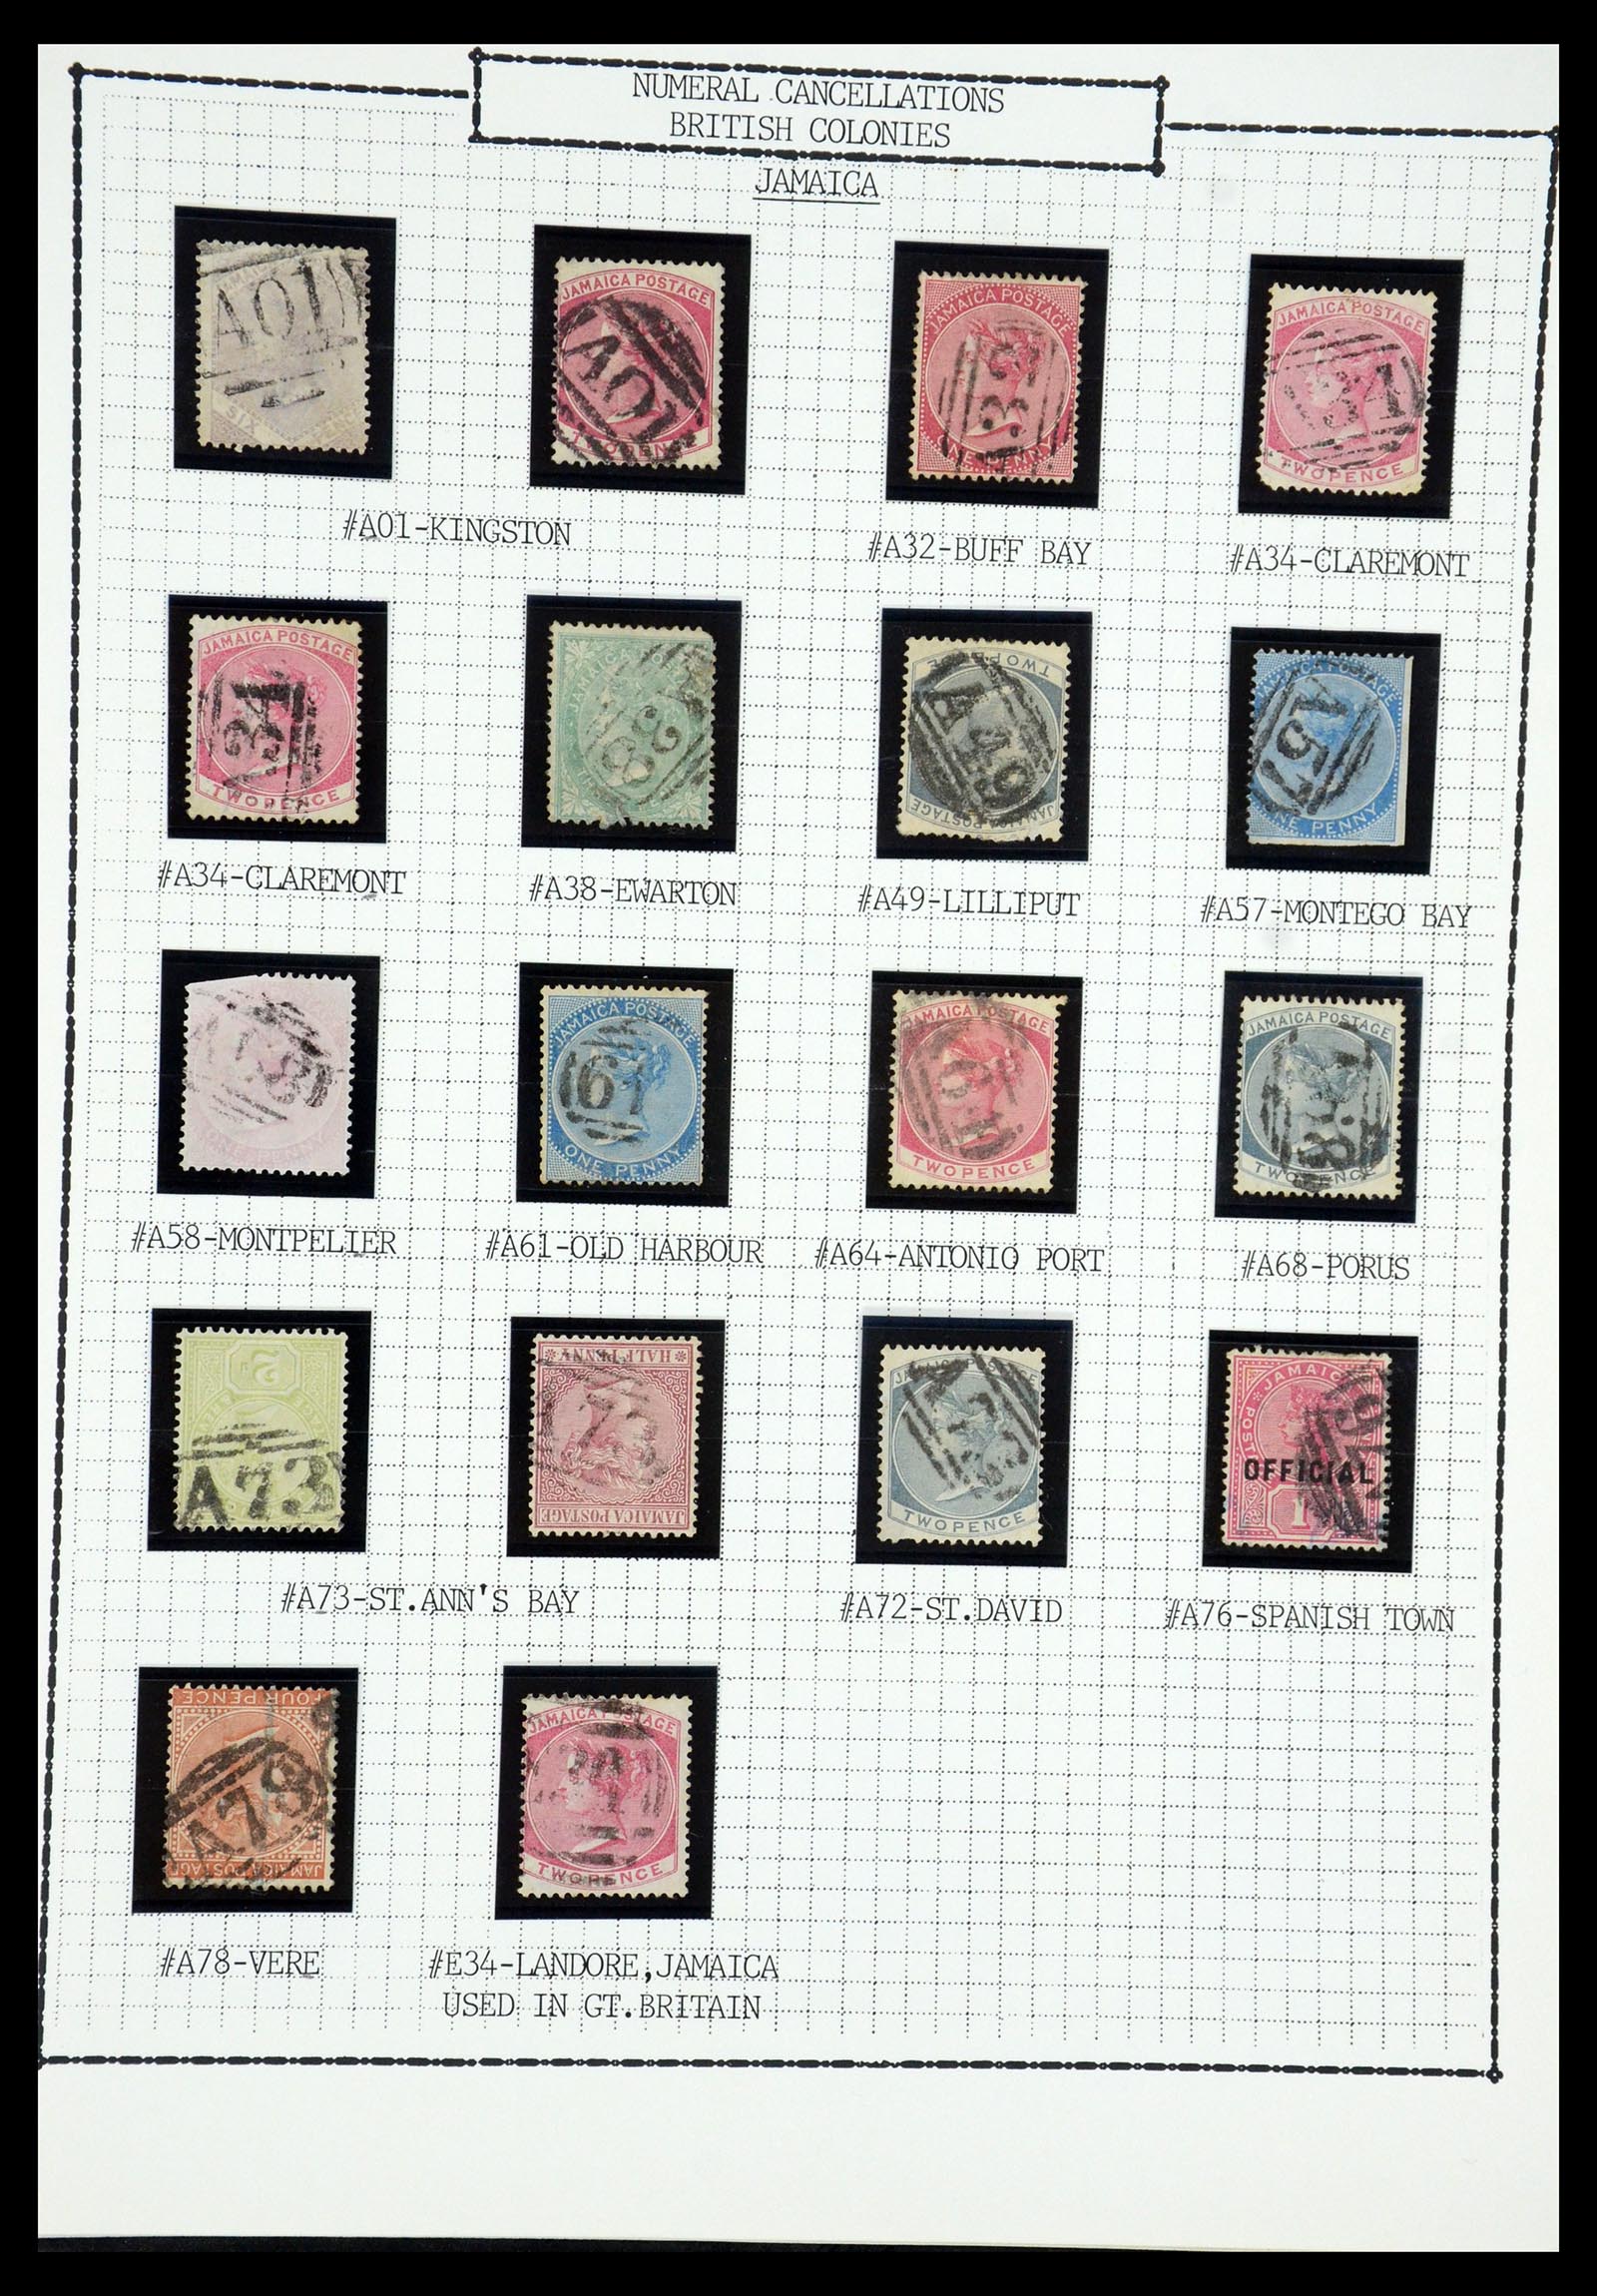 35507 028 - Stamp Collection 35507 Australian States cancels 1859-1899.